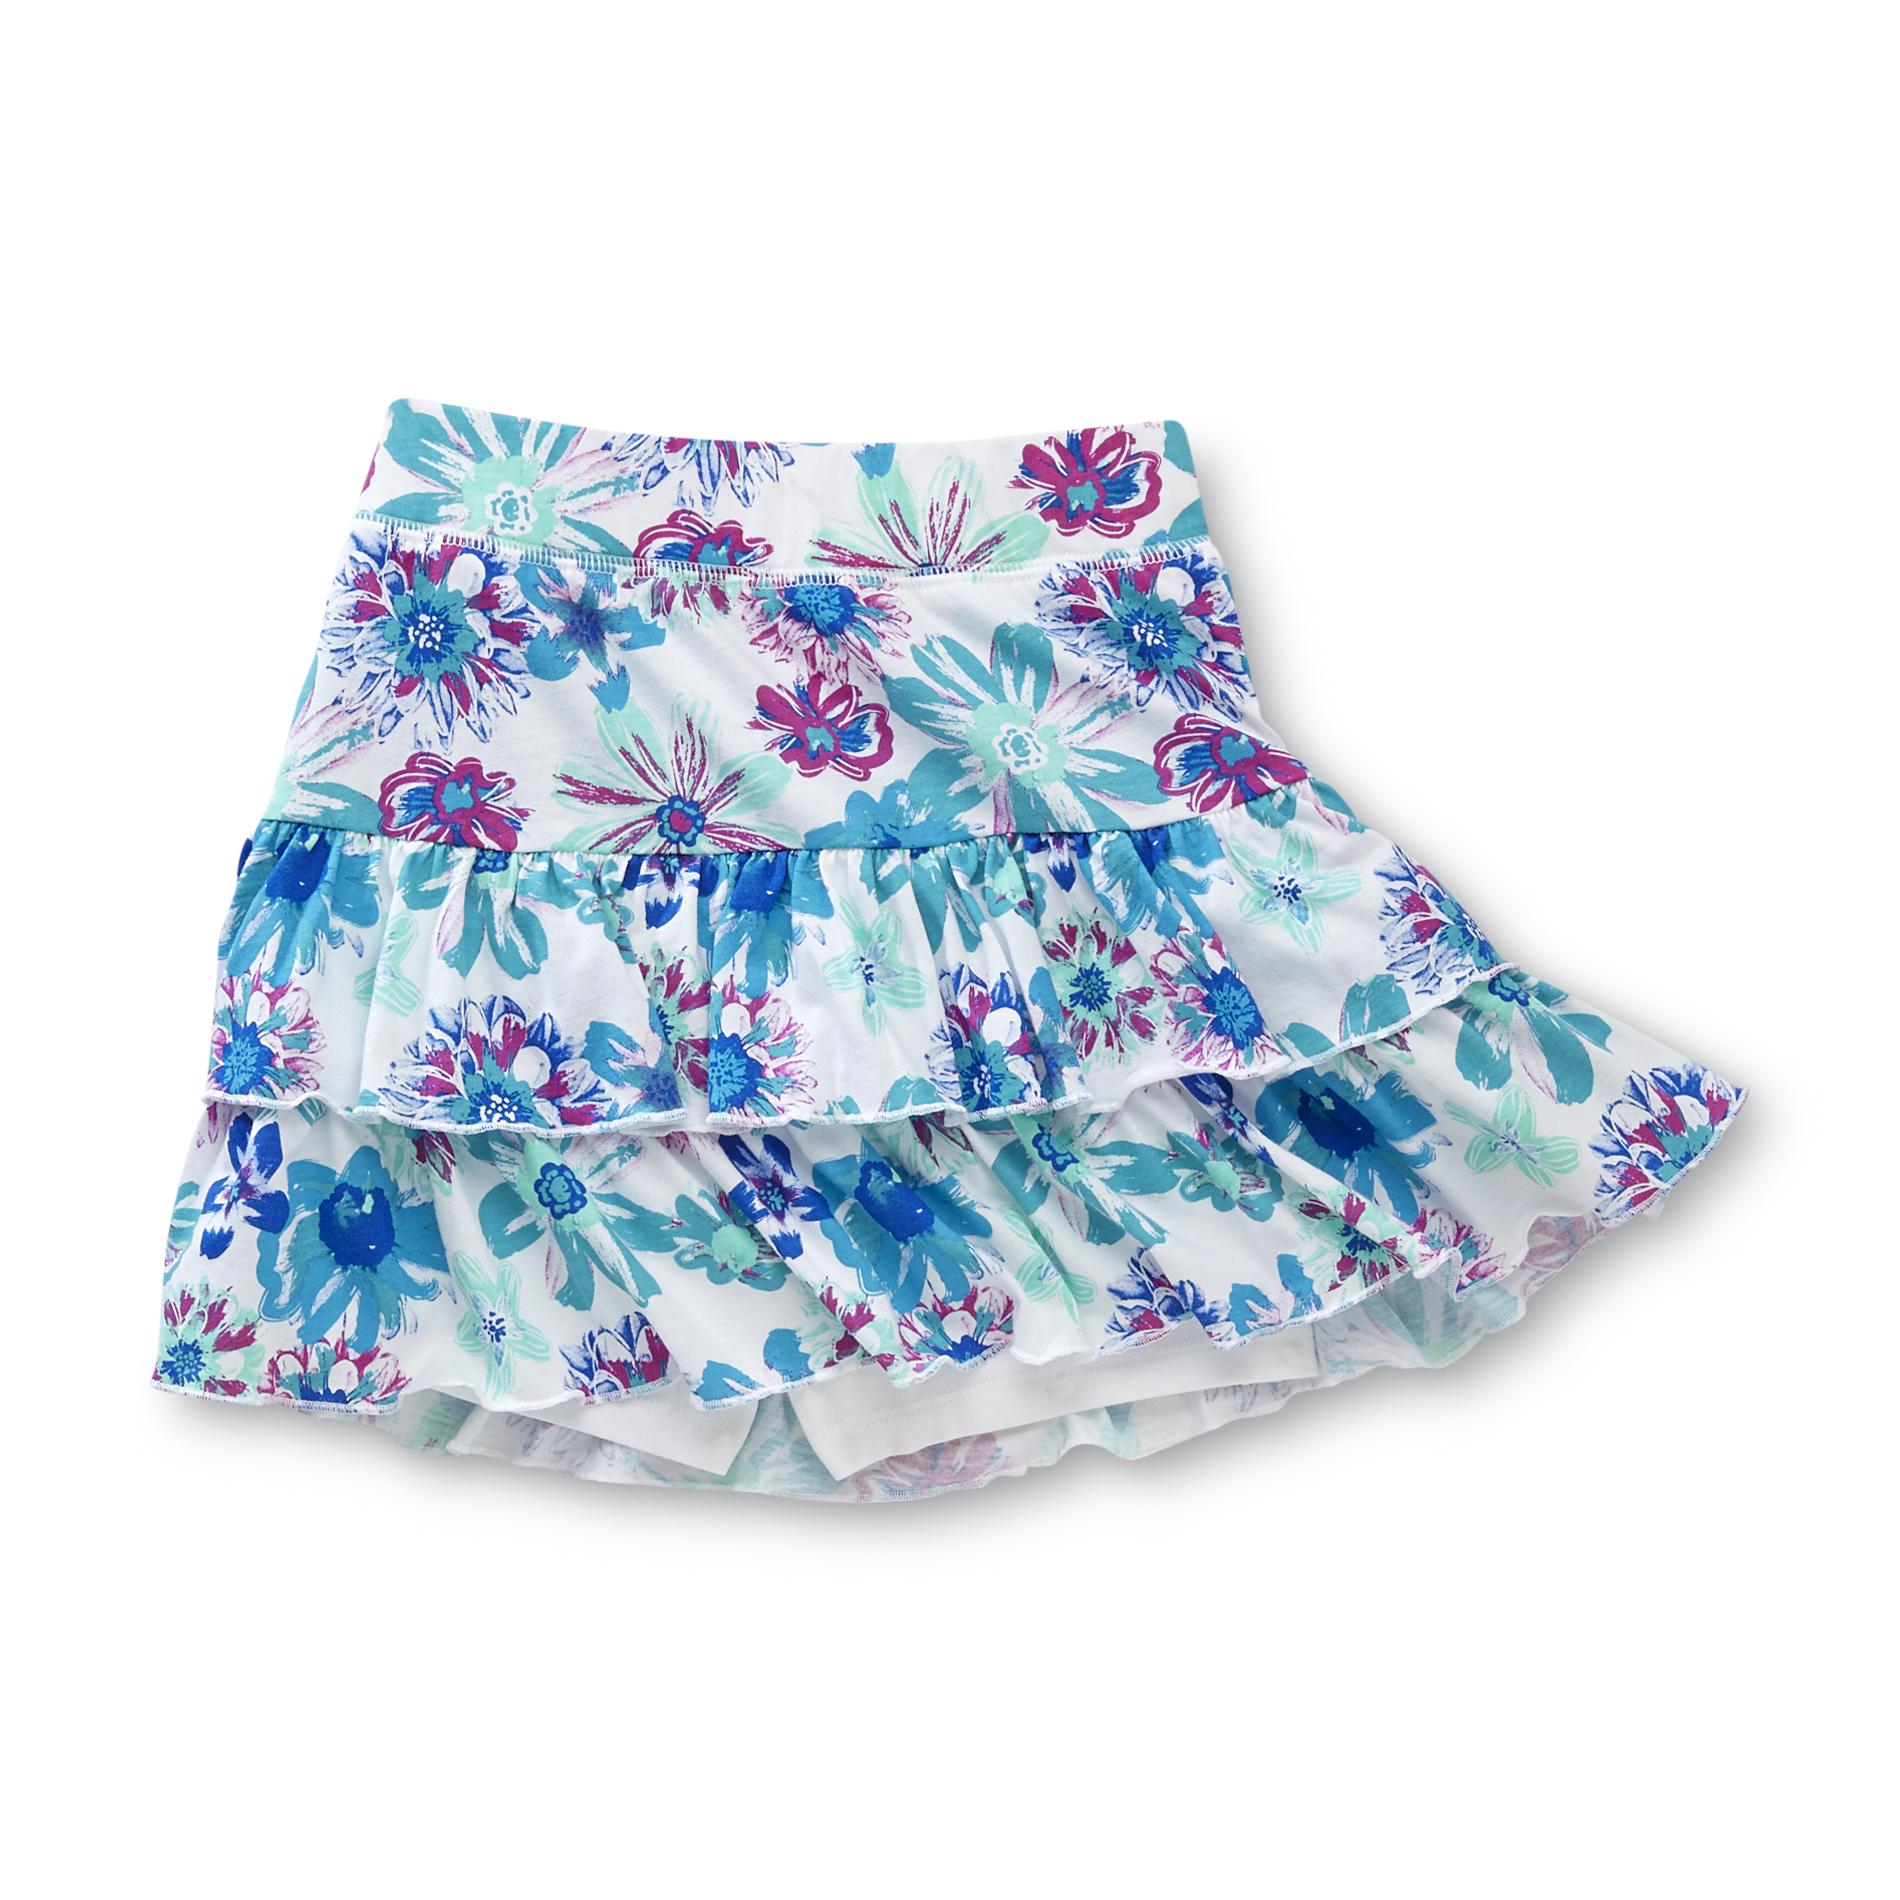 Canyon River Blues Girl's Ruffled Scooter Skirt - Floral